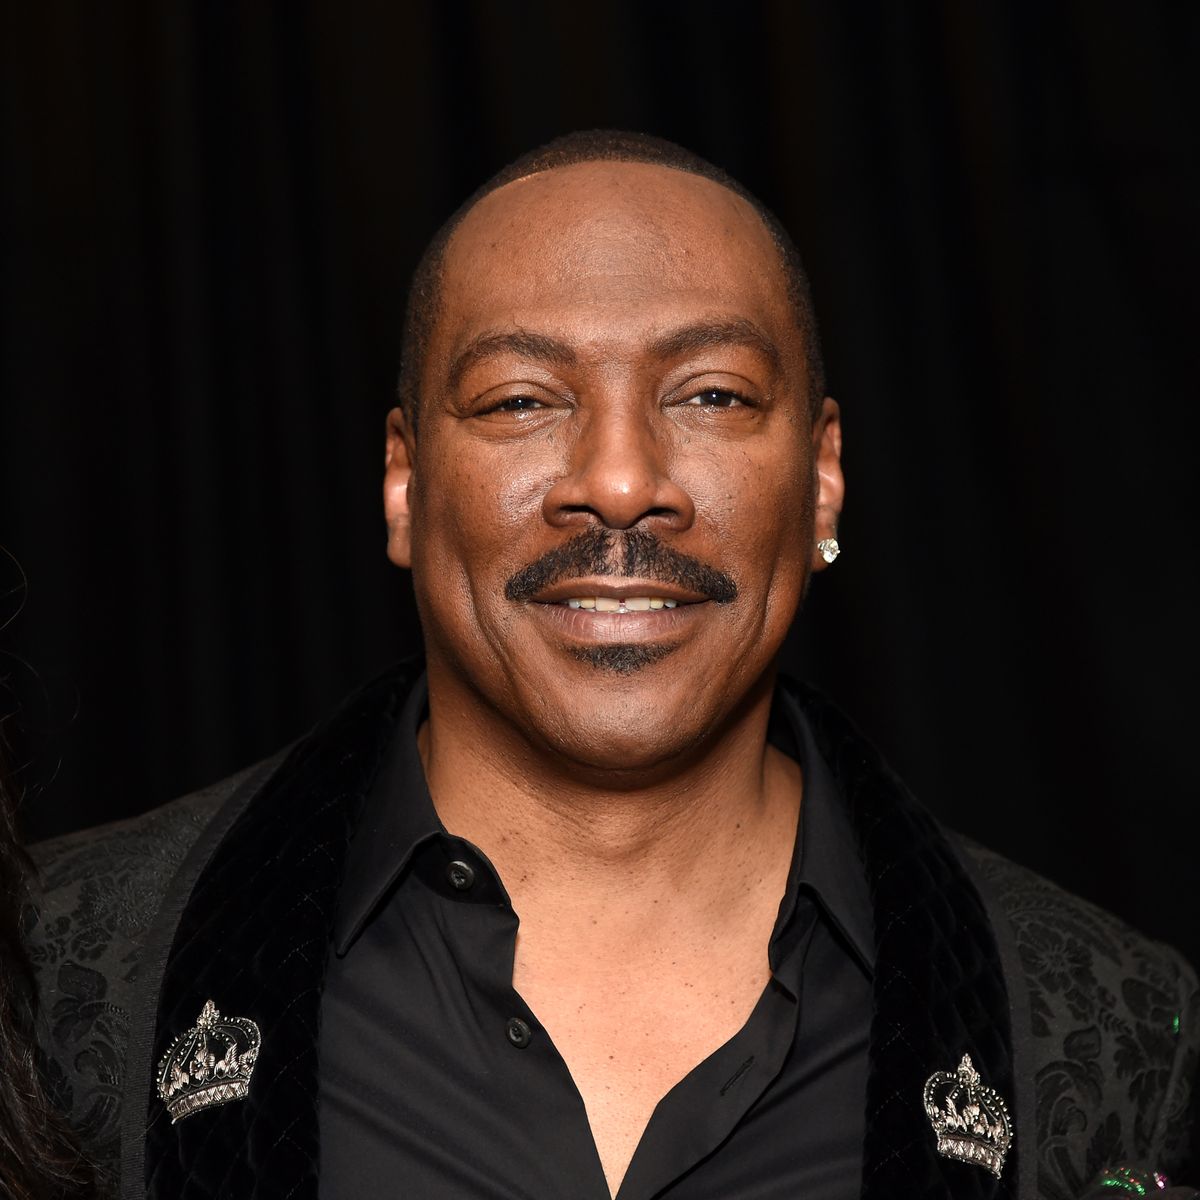 Critics' Choice Association The Celebration Of Black Cinema LOS ANGELES, CALIFORNIA - DECEMBER 02: Eddie Murphy attends Critics' Choice Association's Celebration of Black Cinema at Landmark Annex on December 02, 2019 in Los Angeles, California. (Photo by Michael Kovac/Getty Images for Niche Imports)